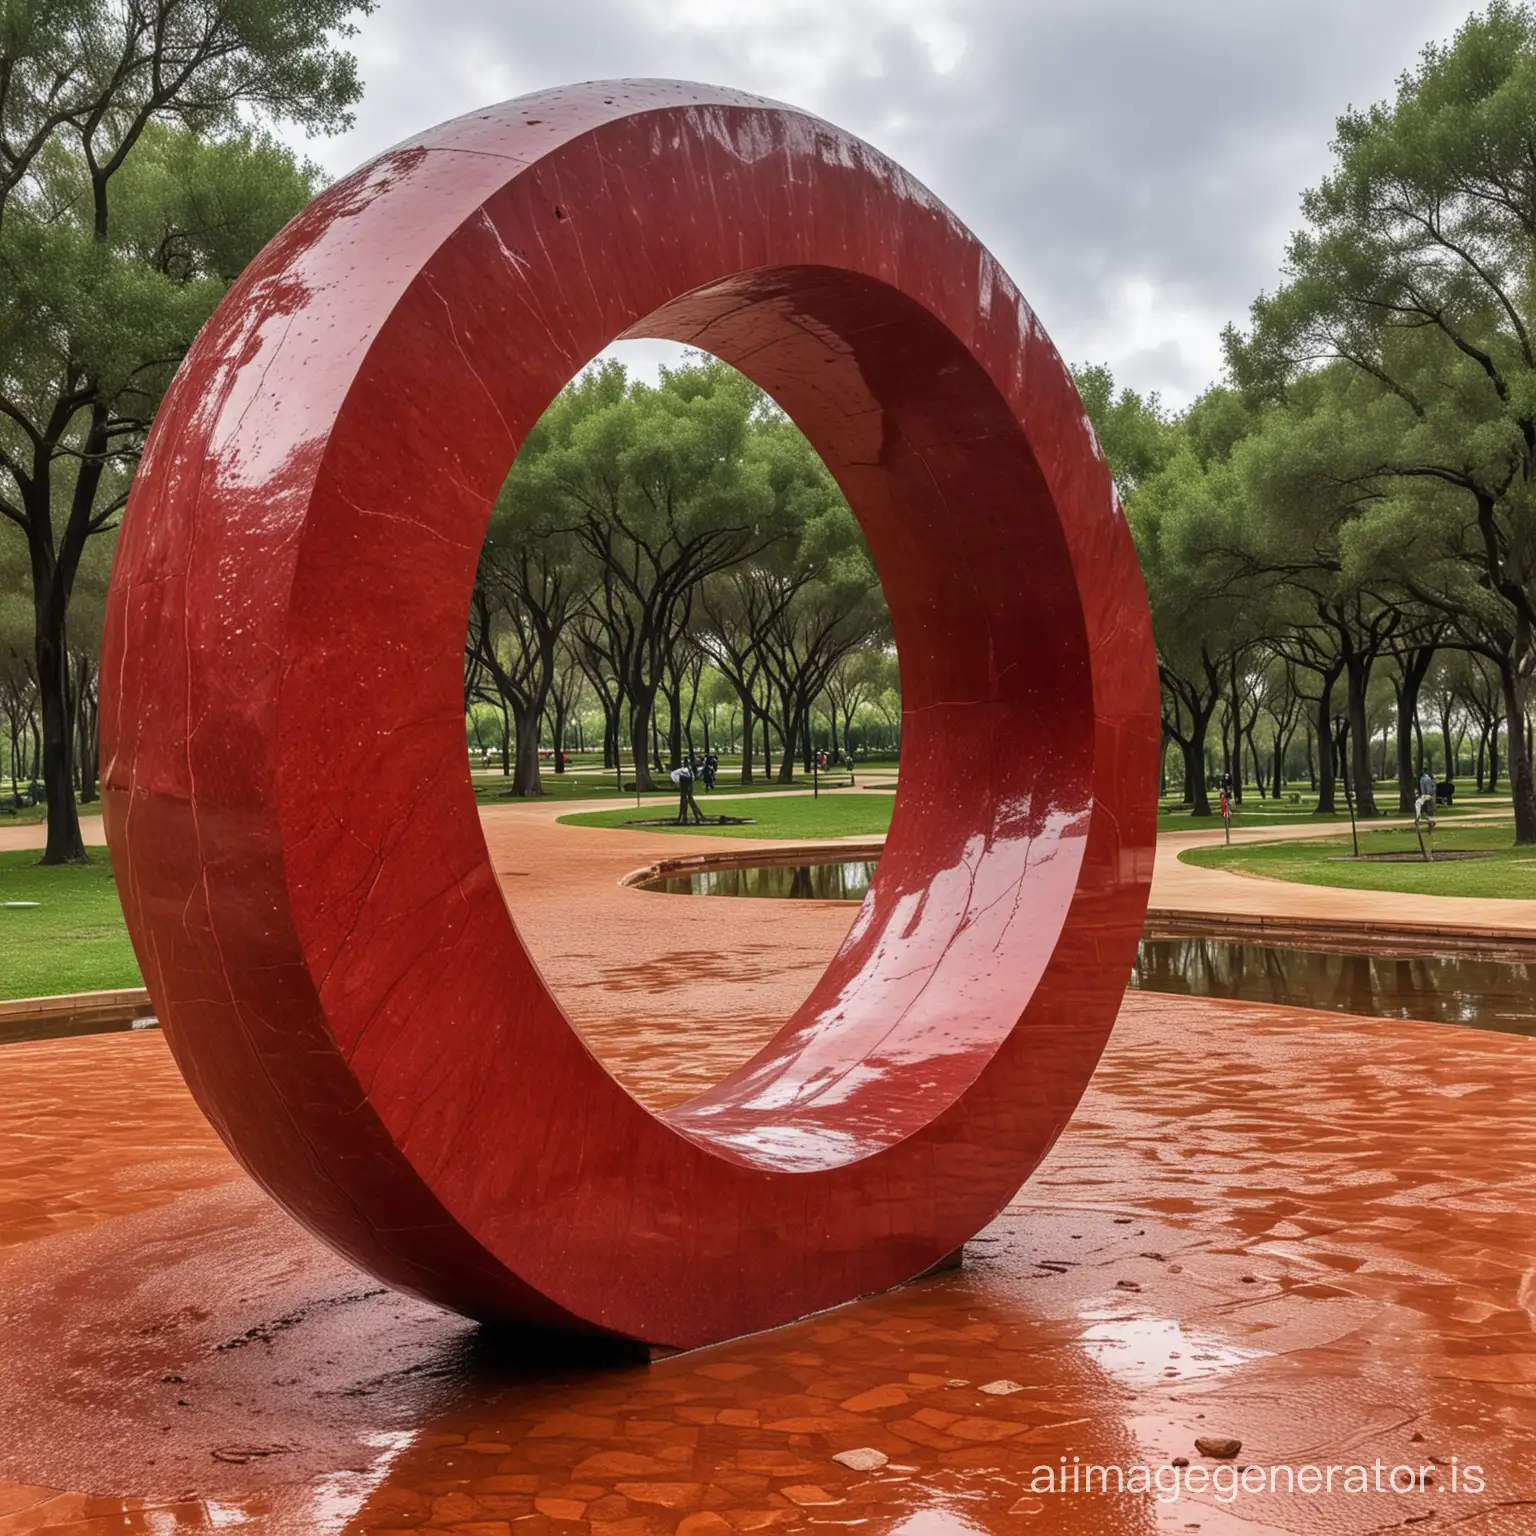 Sunrise-Reflections-Shiny-Red-Stone-Oval-Sculpture-in-Spanish-Park